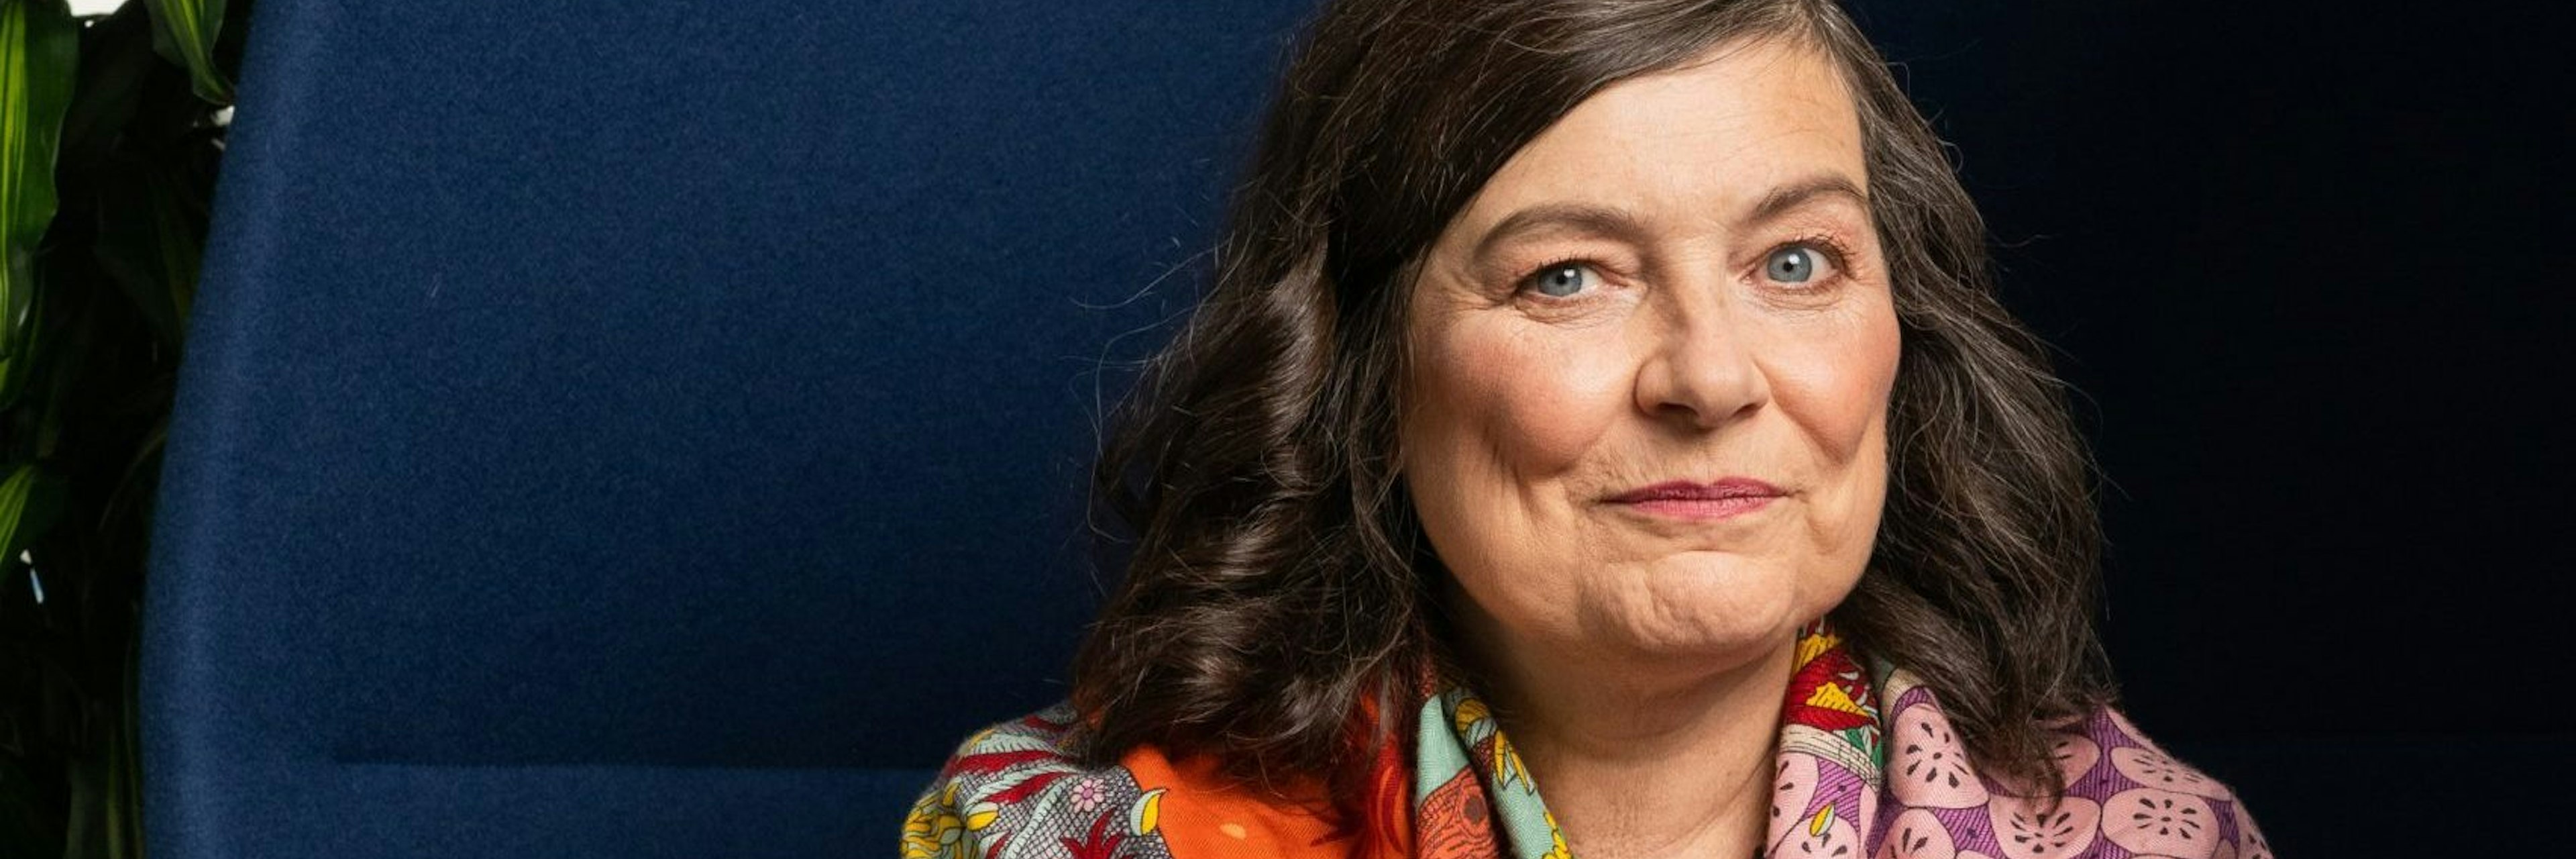 Starling Bank CEO Anne Boden